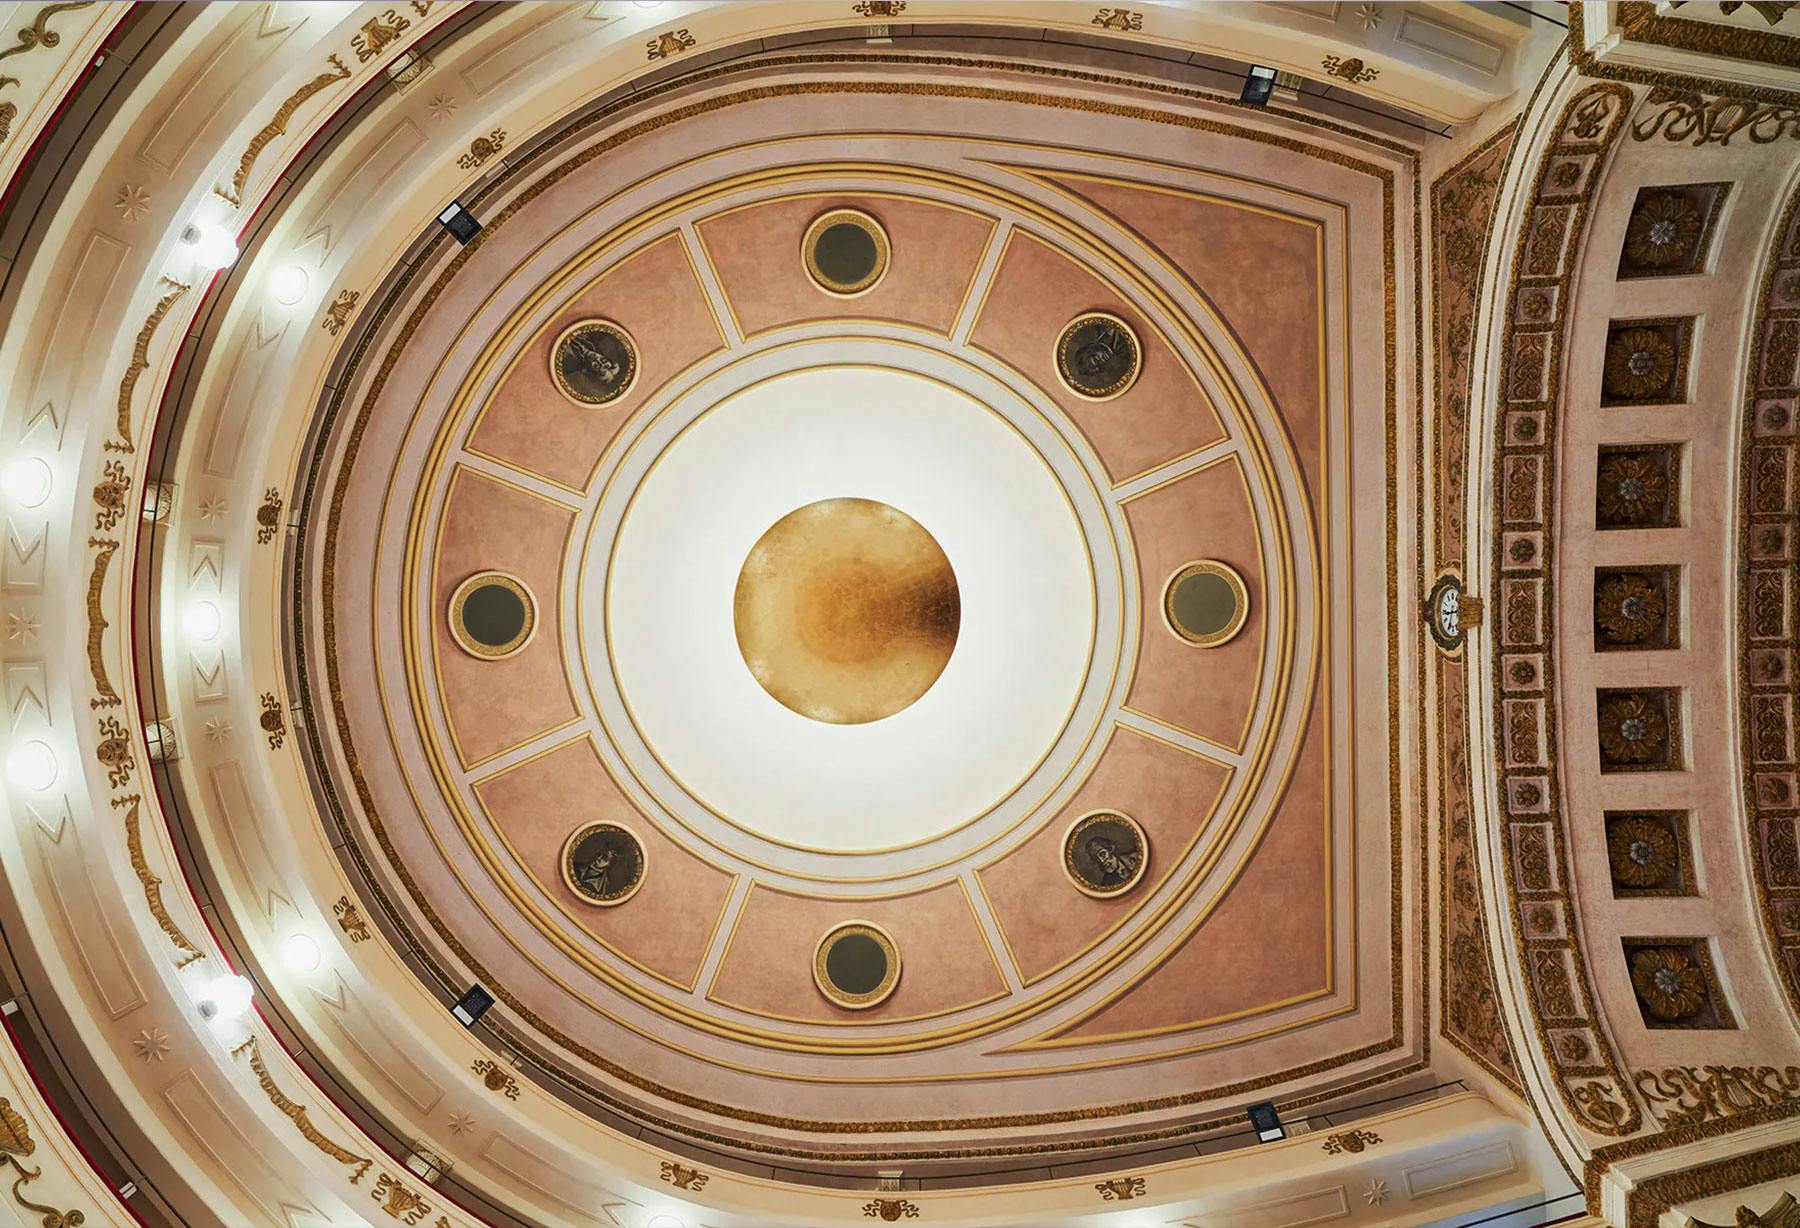 <p>Catellani &amp; Smith takes part to the ambitious restoration project of the “Teatro Sociale Camogli”, whose doors reopen after 40 years of inactivity, thanks to the work of Studio Berlucchi in Brescia and Arassociati in Milan,  providing a series of lamps with an extraordinary scenic impact, such as the great golden disc that hides a lighting source by Light Contract, the company that has designed the whole lighting project of the theater.</p>
